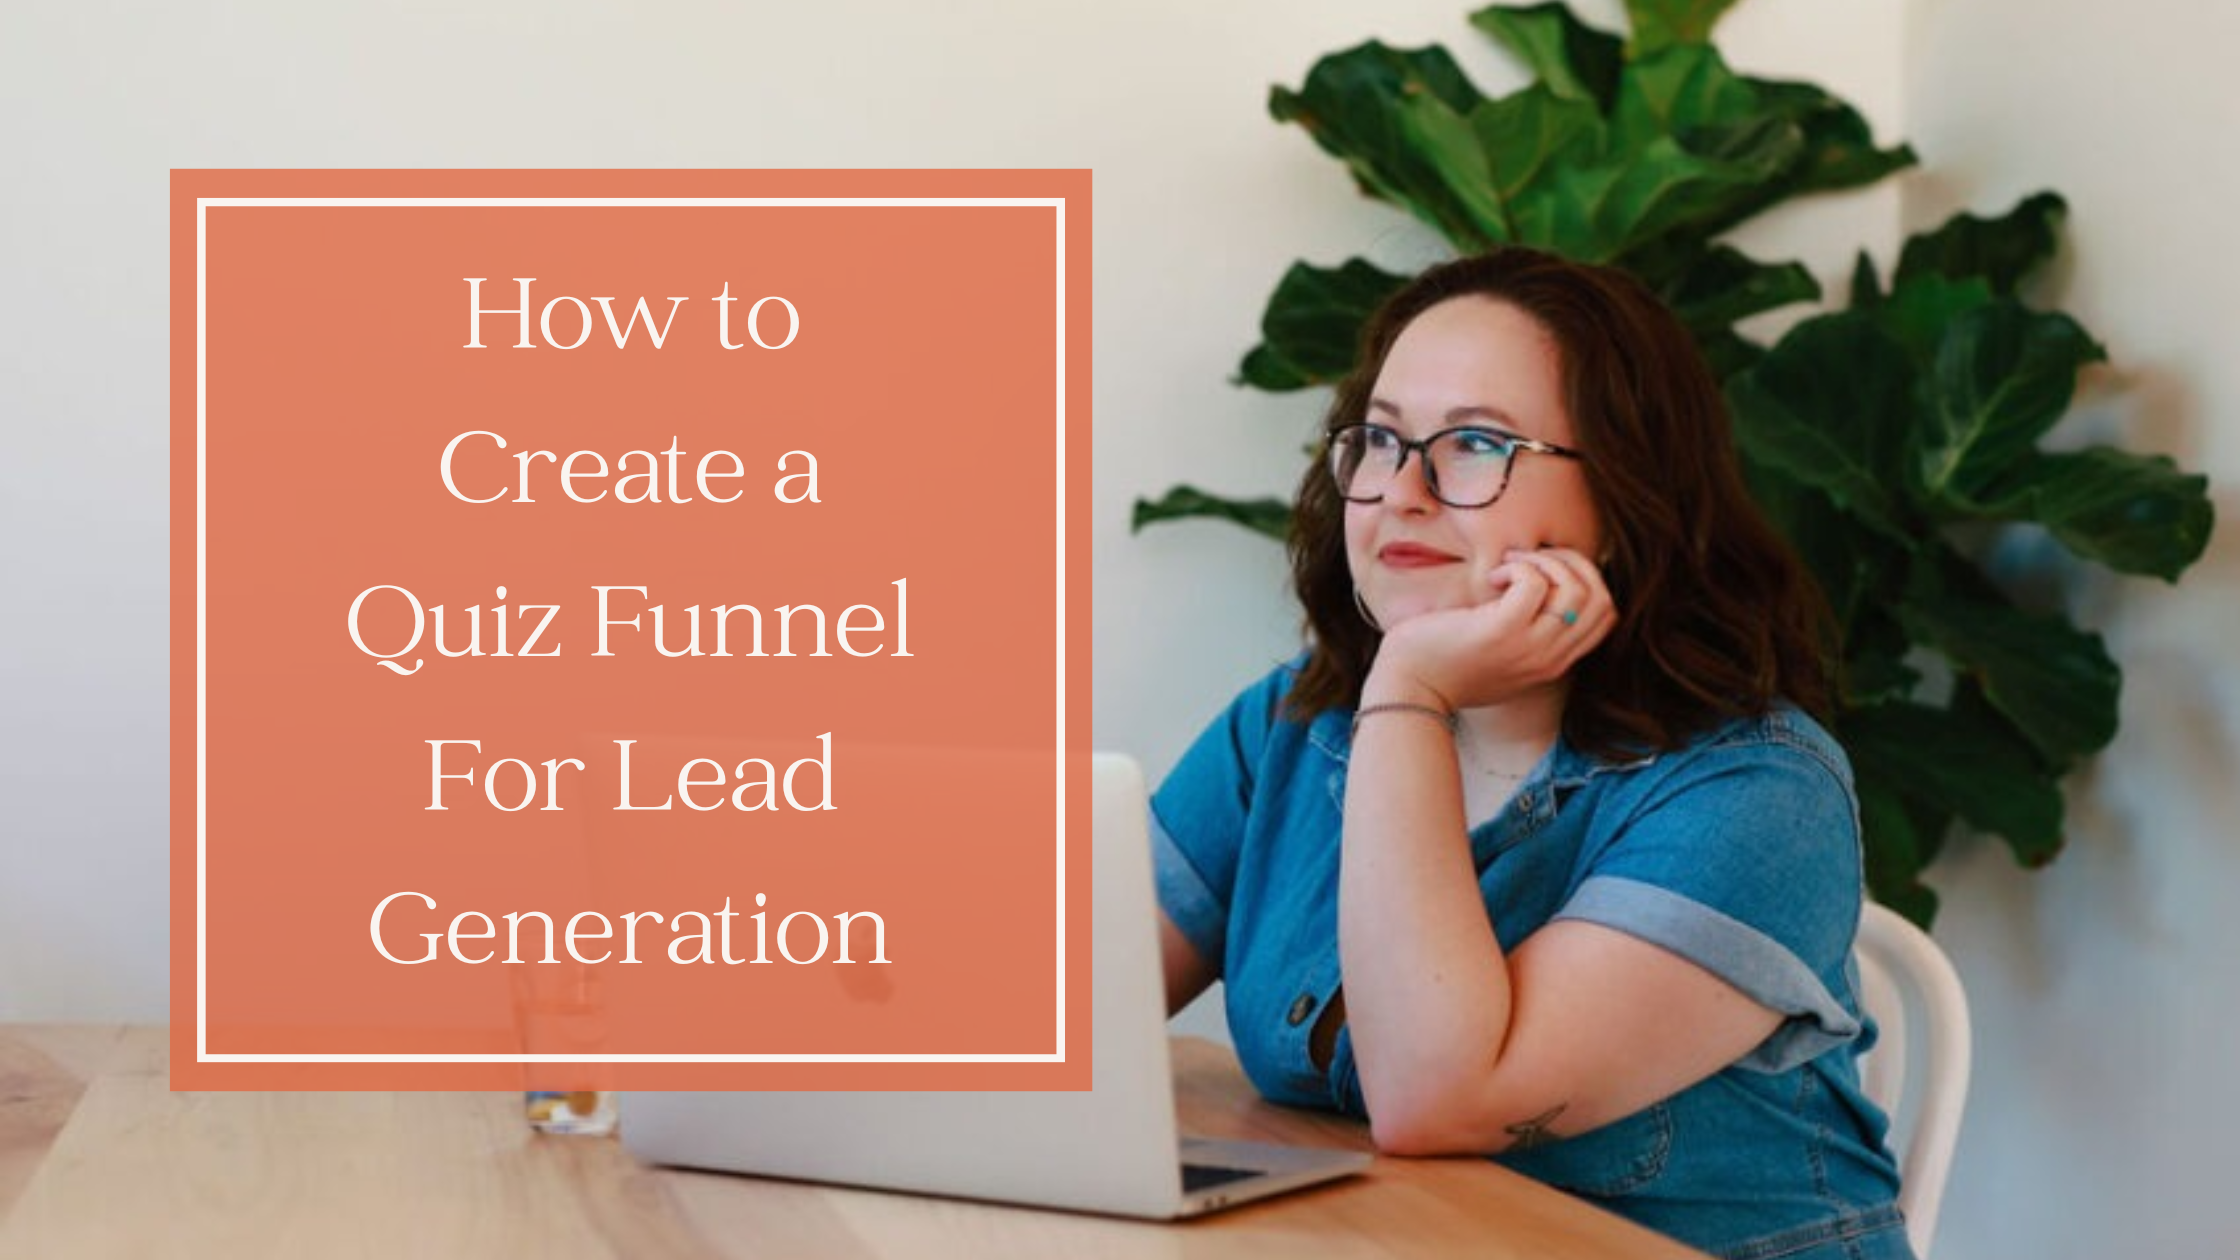 How to Create a Quiz Funnel for Lead Generation